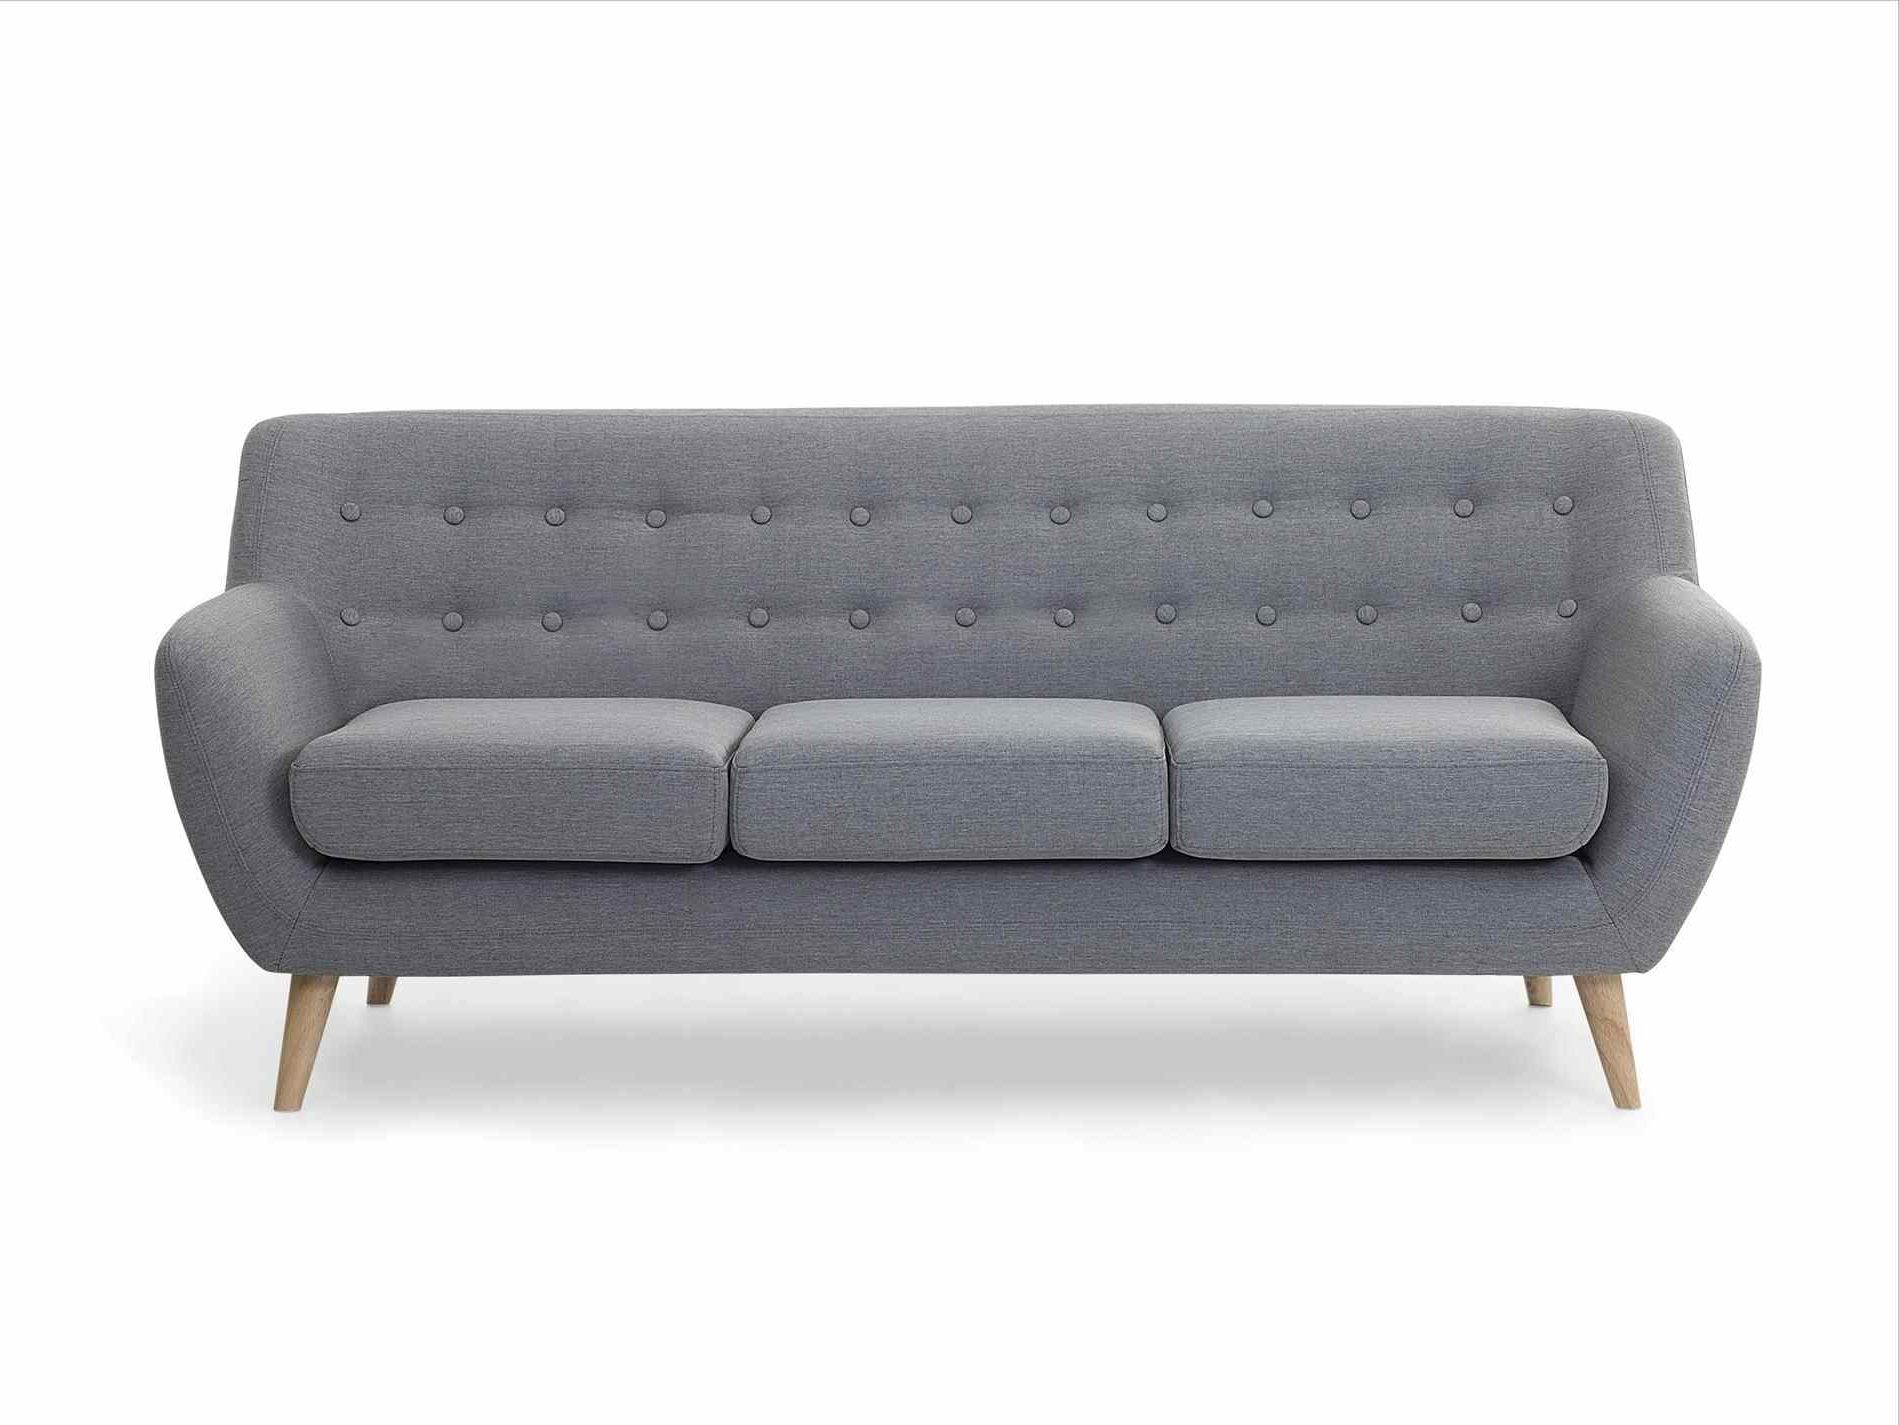 Affordable Tufted Sofas With Regard To Widely Used Sofa : Sleeper Sofa With Tufted Back Gray Tufted Settee Cheap (View 17 of 20)